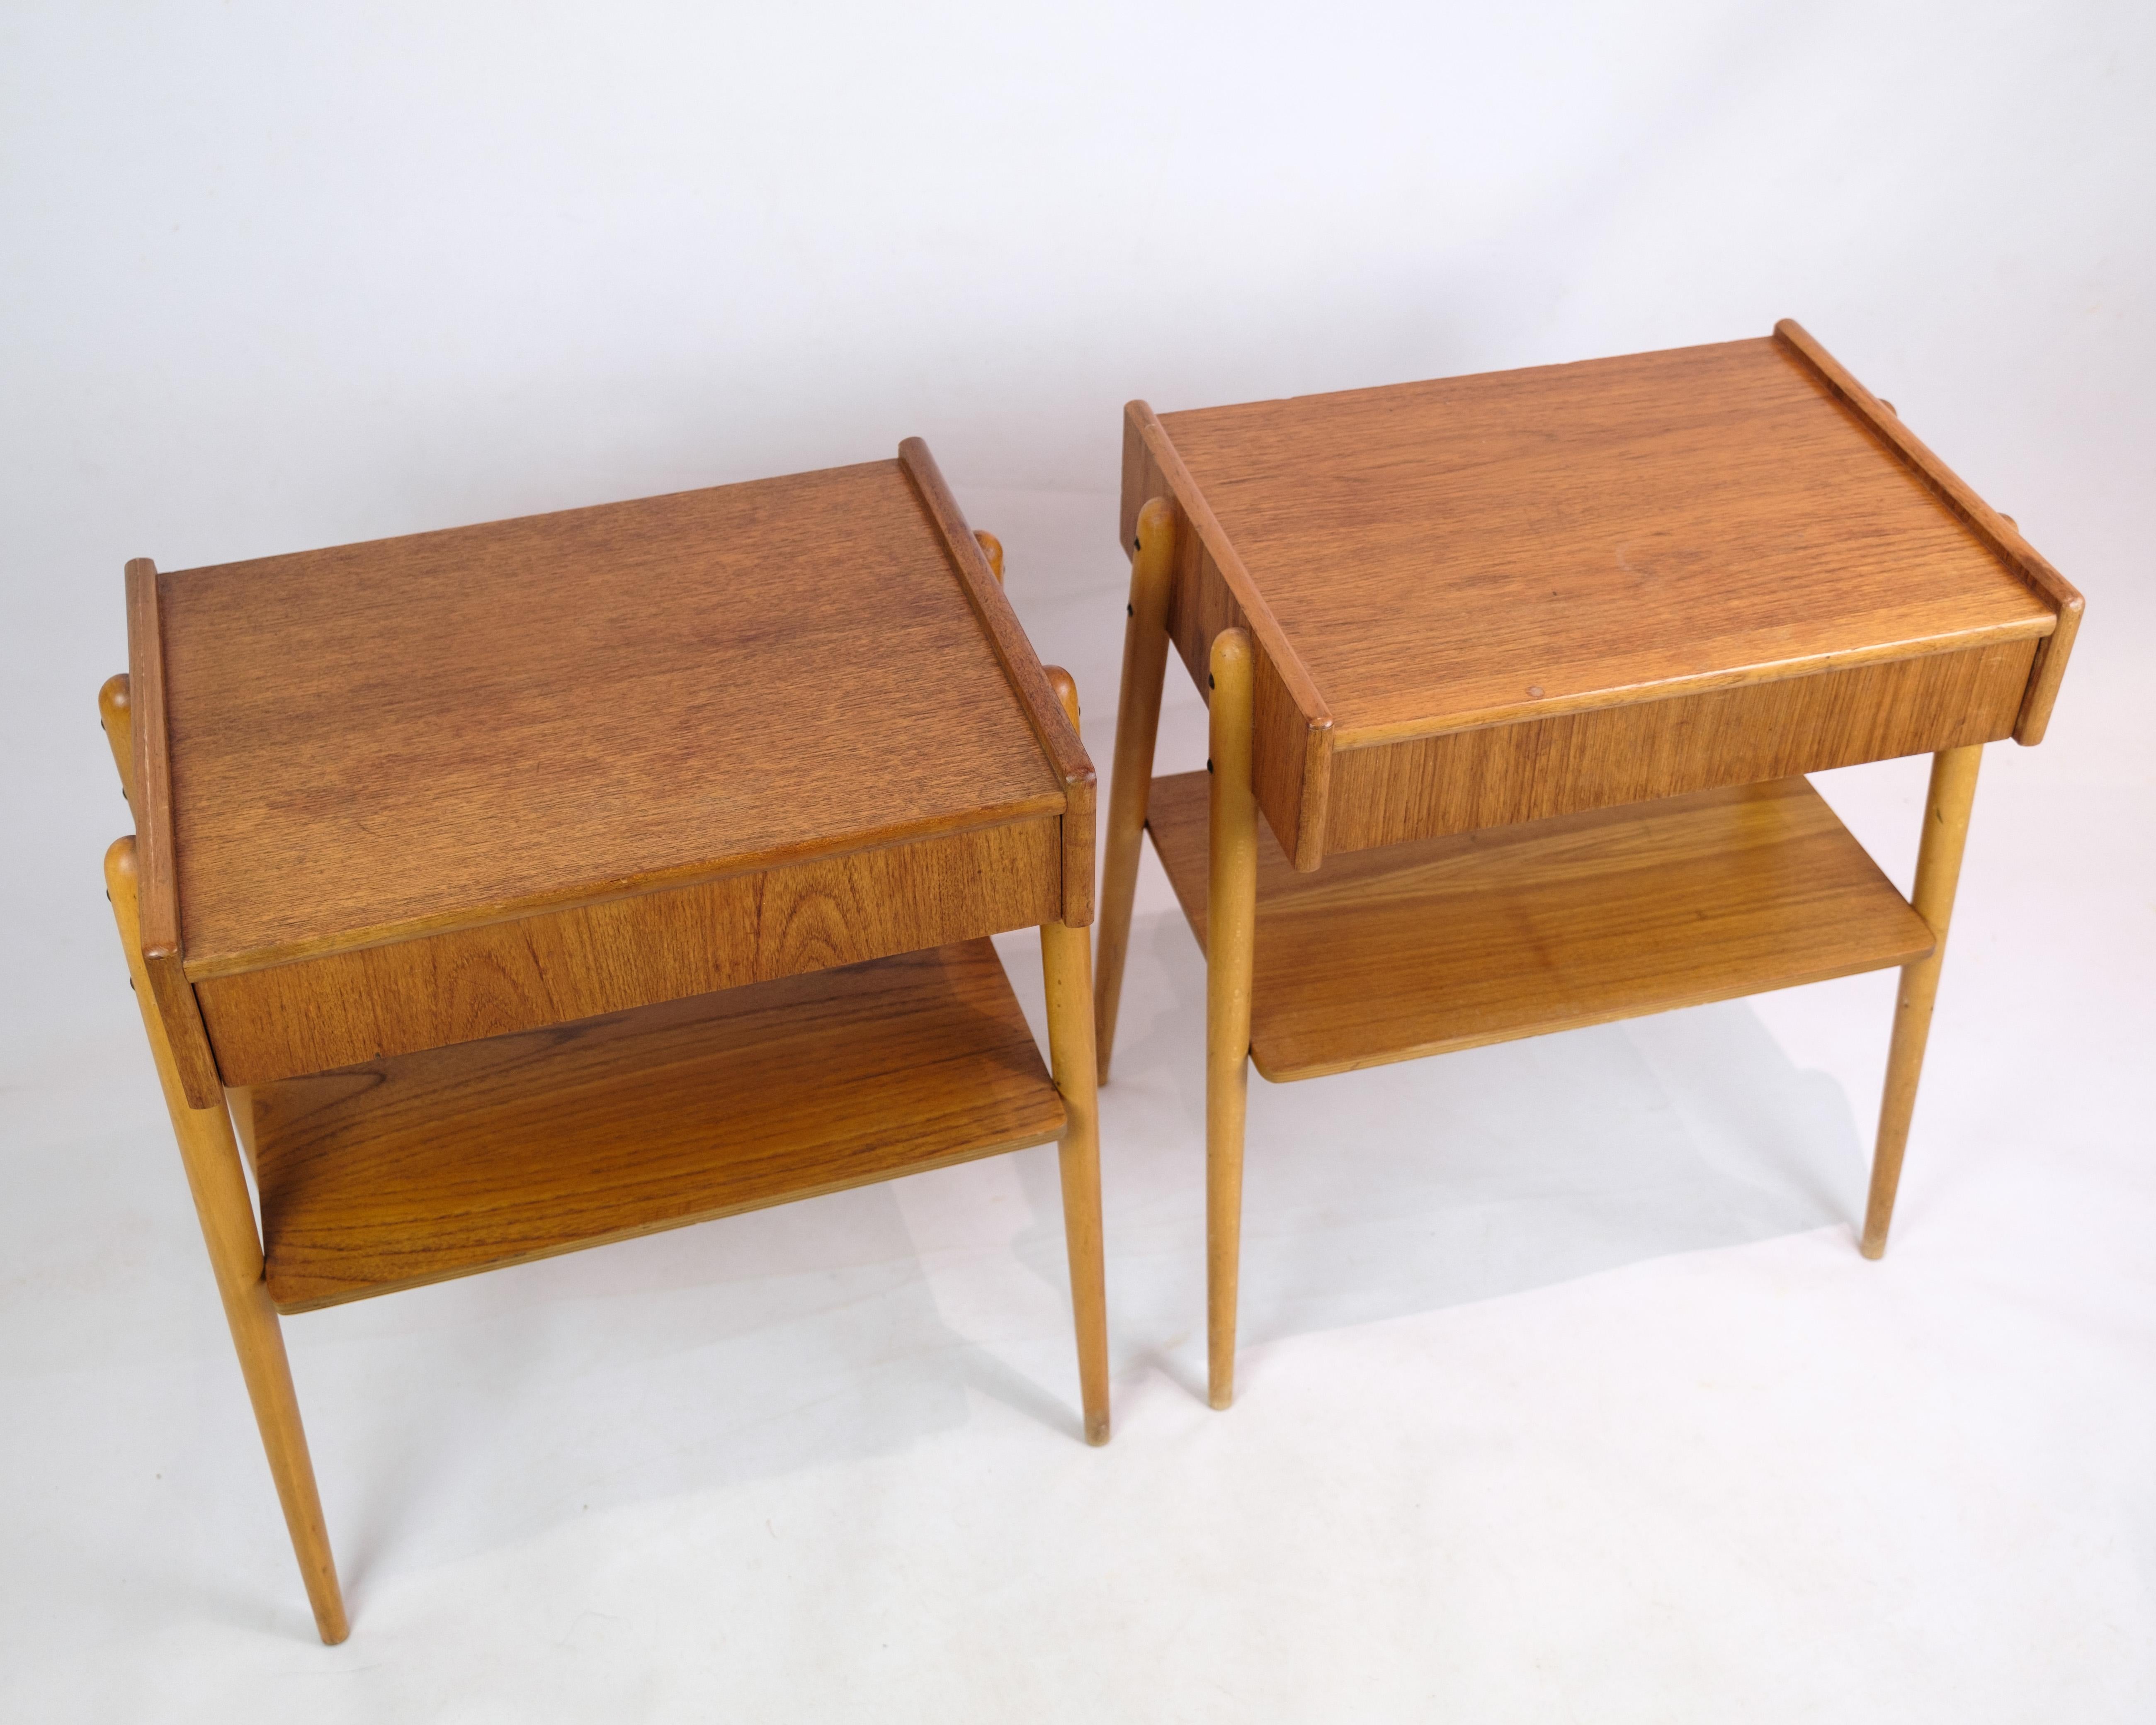 Set of bedside tables on legs with drawer and shelf, manufactured by AB Carlström & Co møbelfabrik in Sweden from the 1950s. These bedside tables represent the timeless and functional design that characterizes Scandinavian furniture art from the